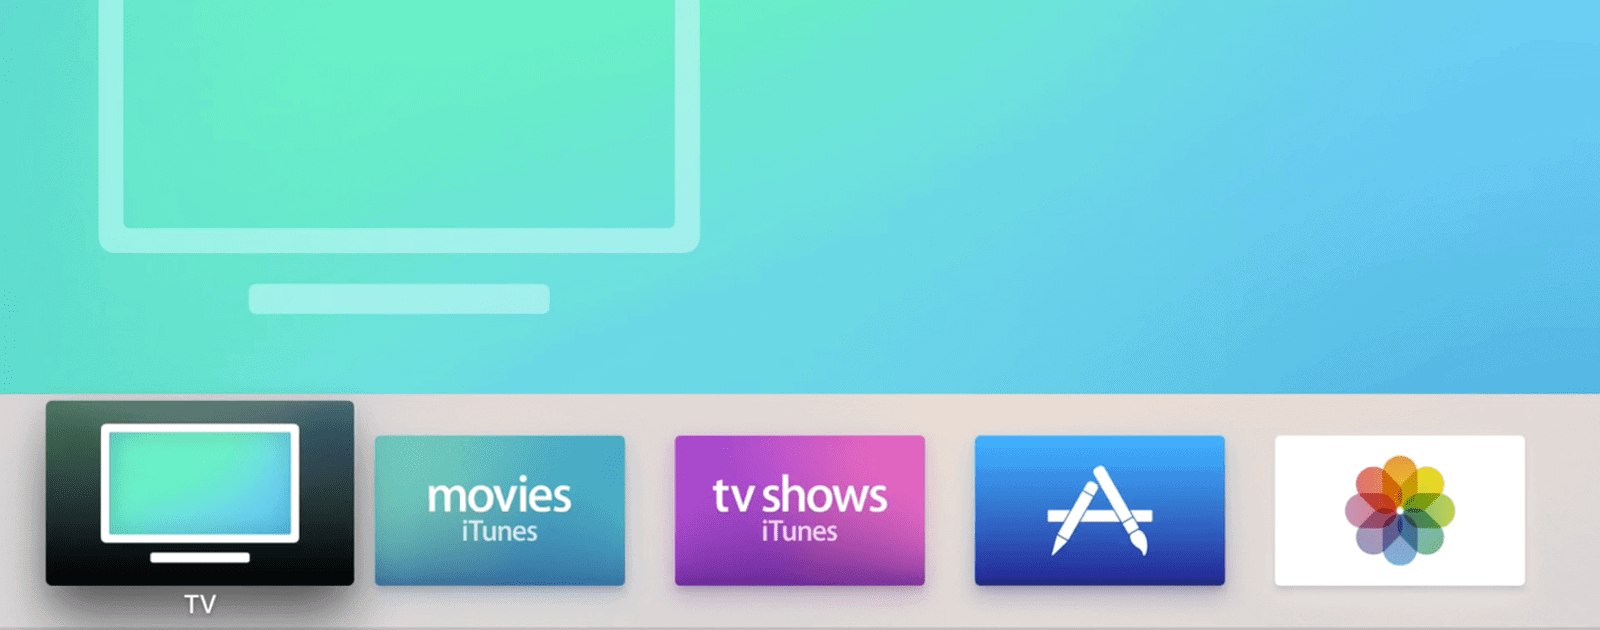 Apple TV App Rolls Out in UK, France, and Germany